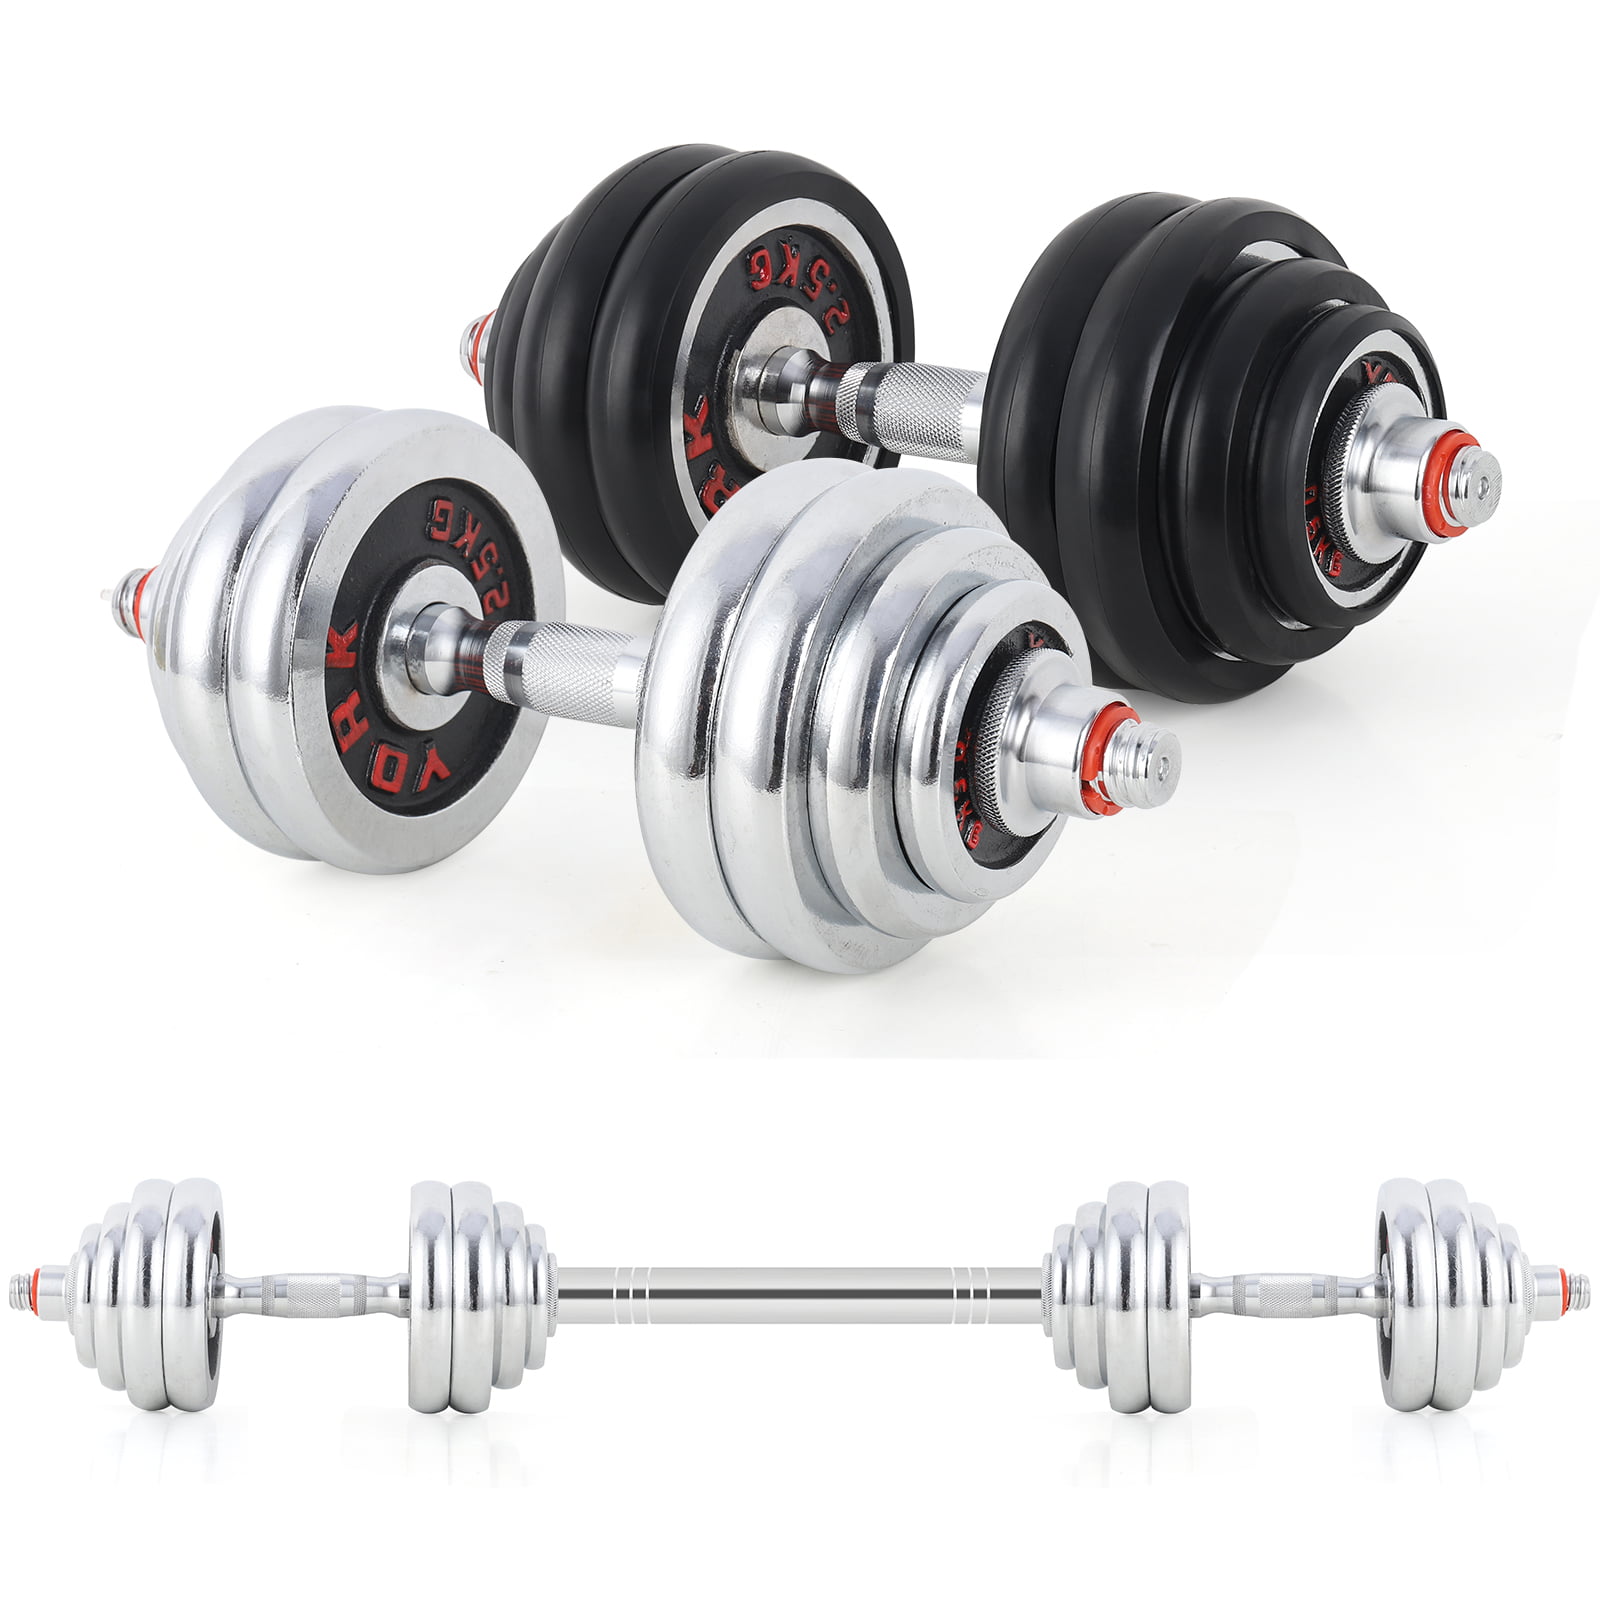 Details about   Totall 44 LB Weight Dumbbell Set Adjustable Cap Gym Barbell Plates Body Workout 